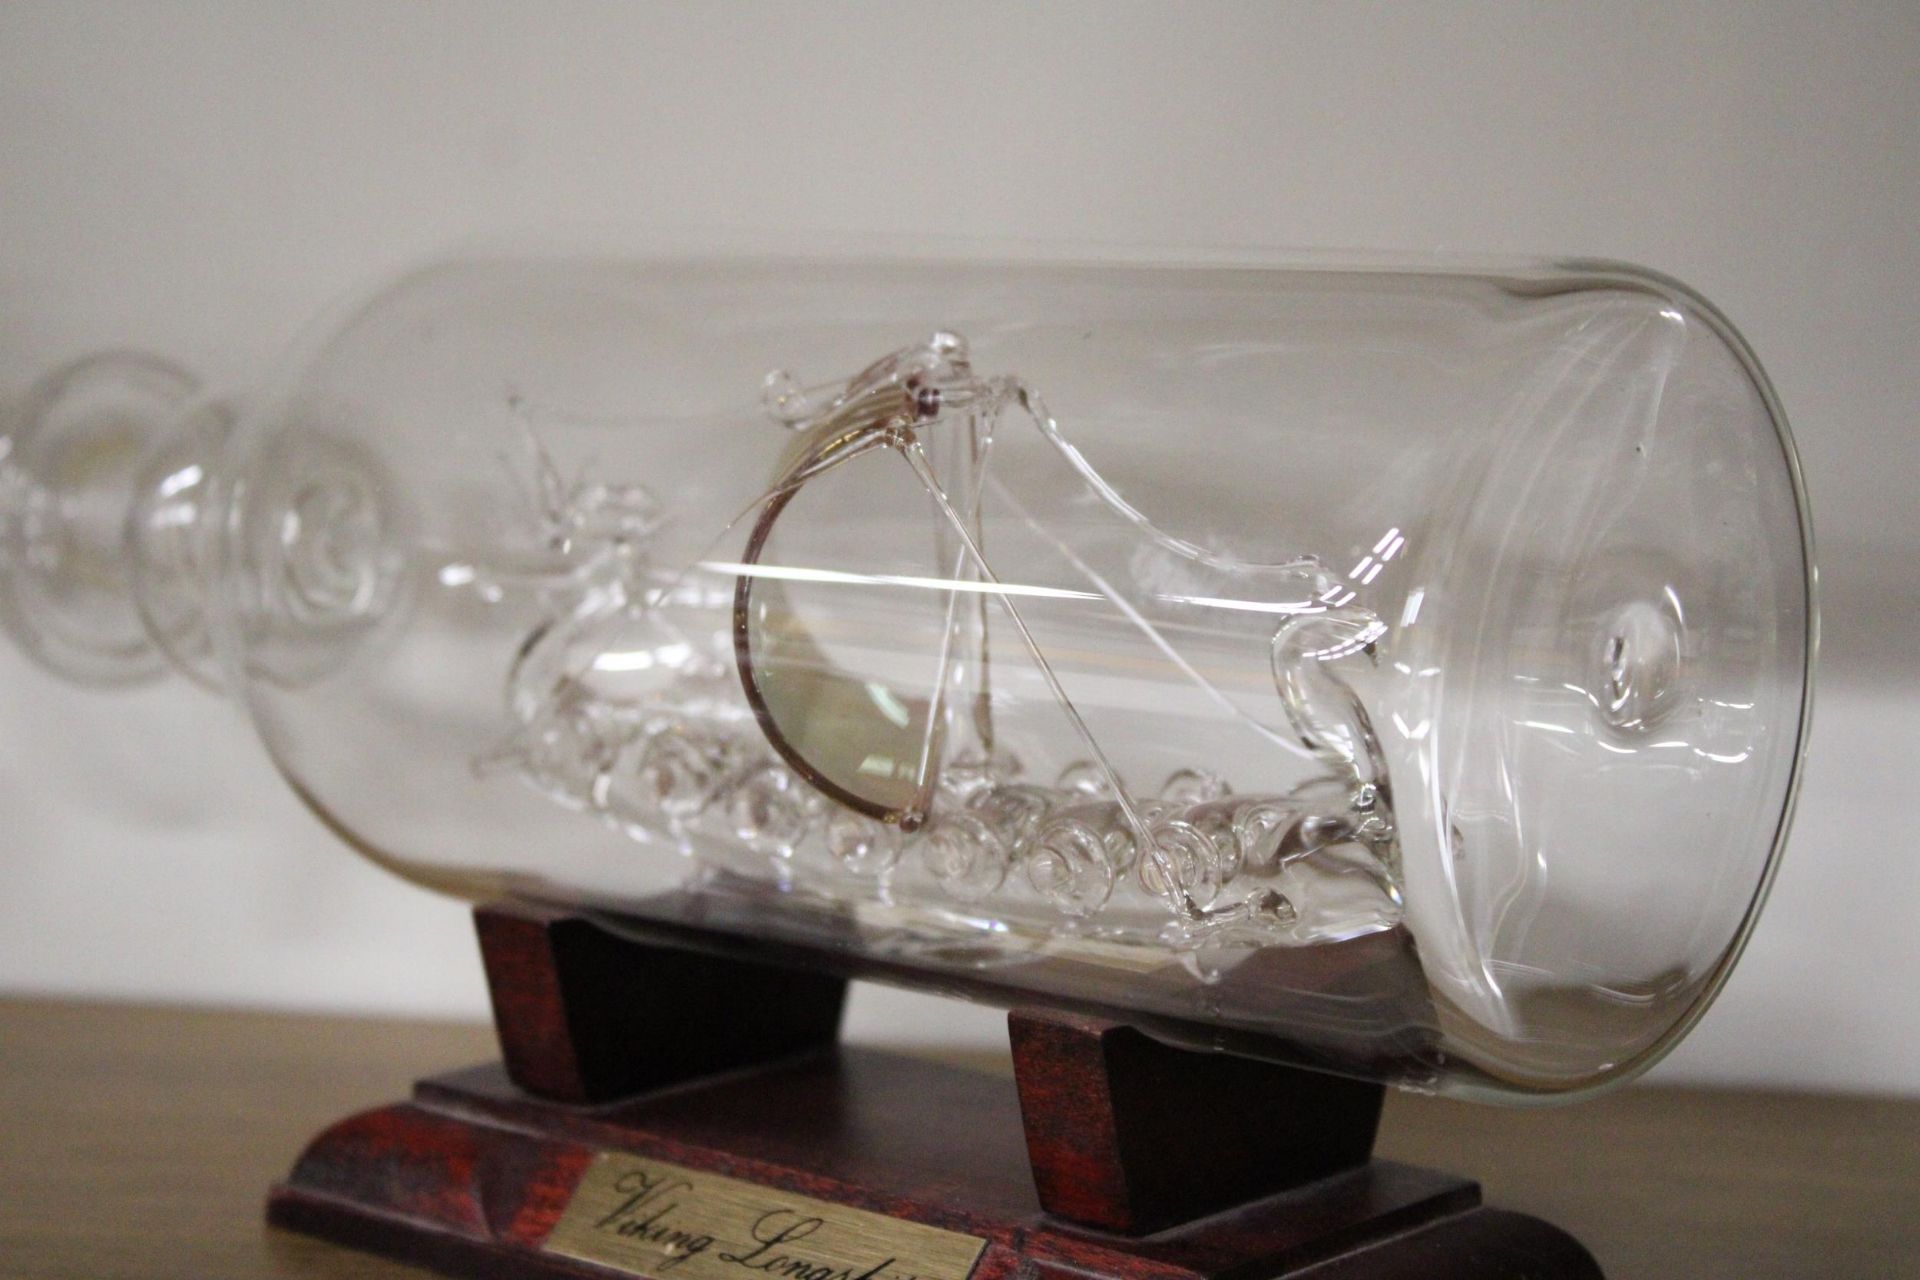 A GLASS MODEL OF A VIKING LONGSHIP IN A BOTTLE - Image 4 of 5